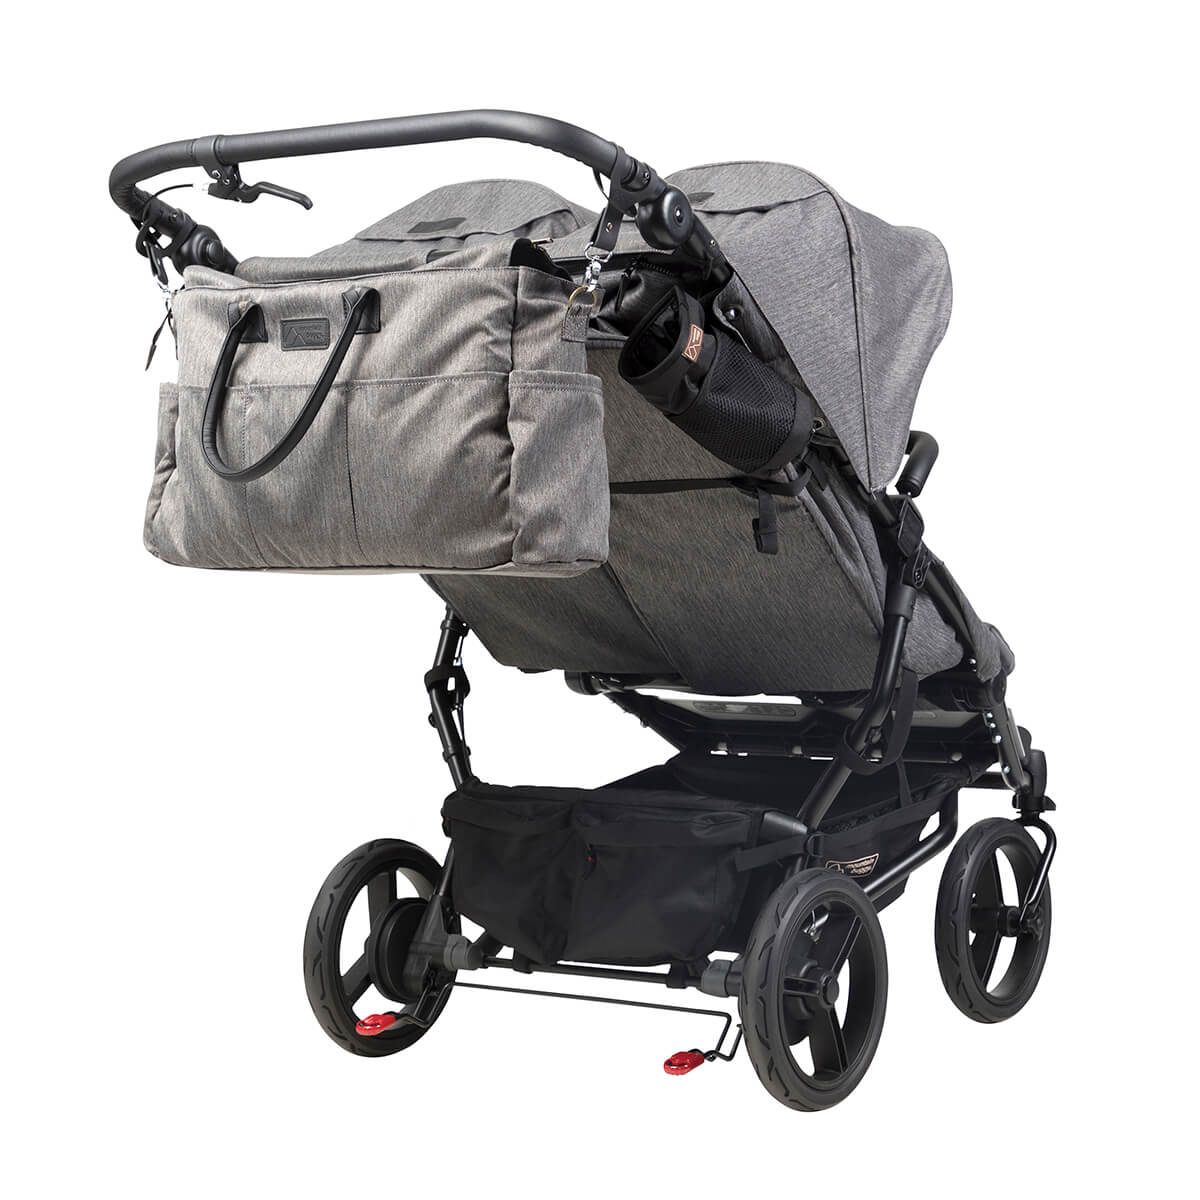 Mountain Buggy duet luxury collection buggy rear three quarter view with satchel_herringbone